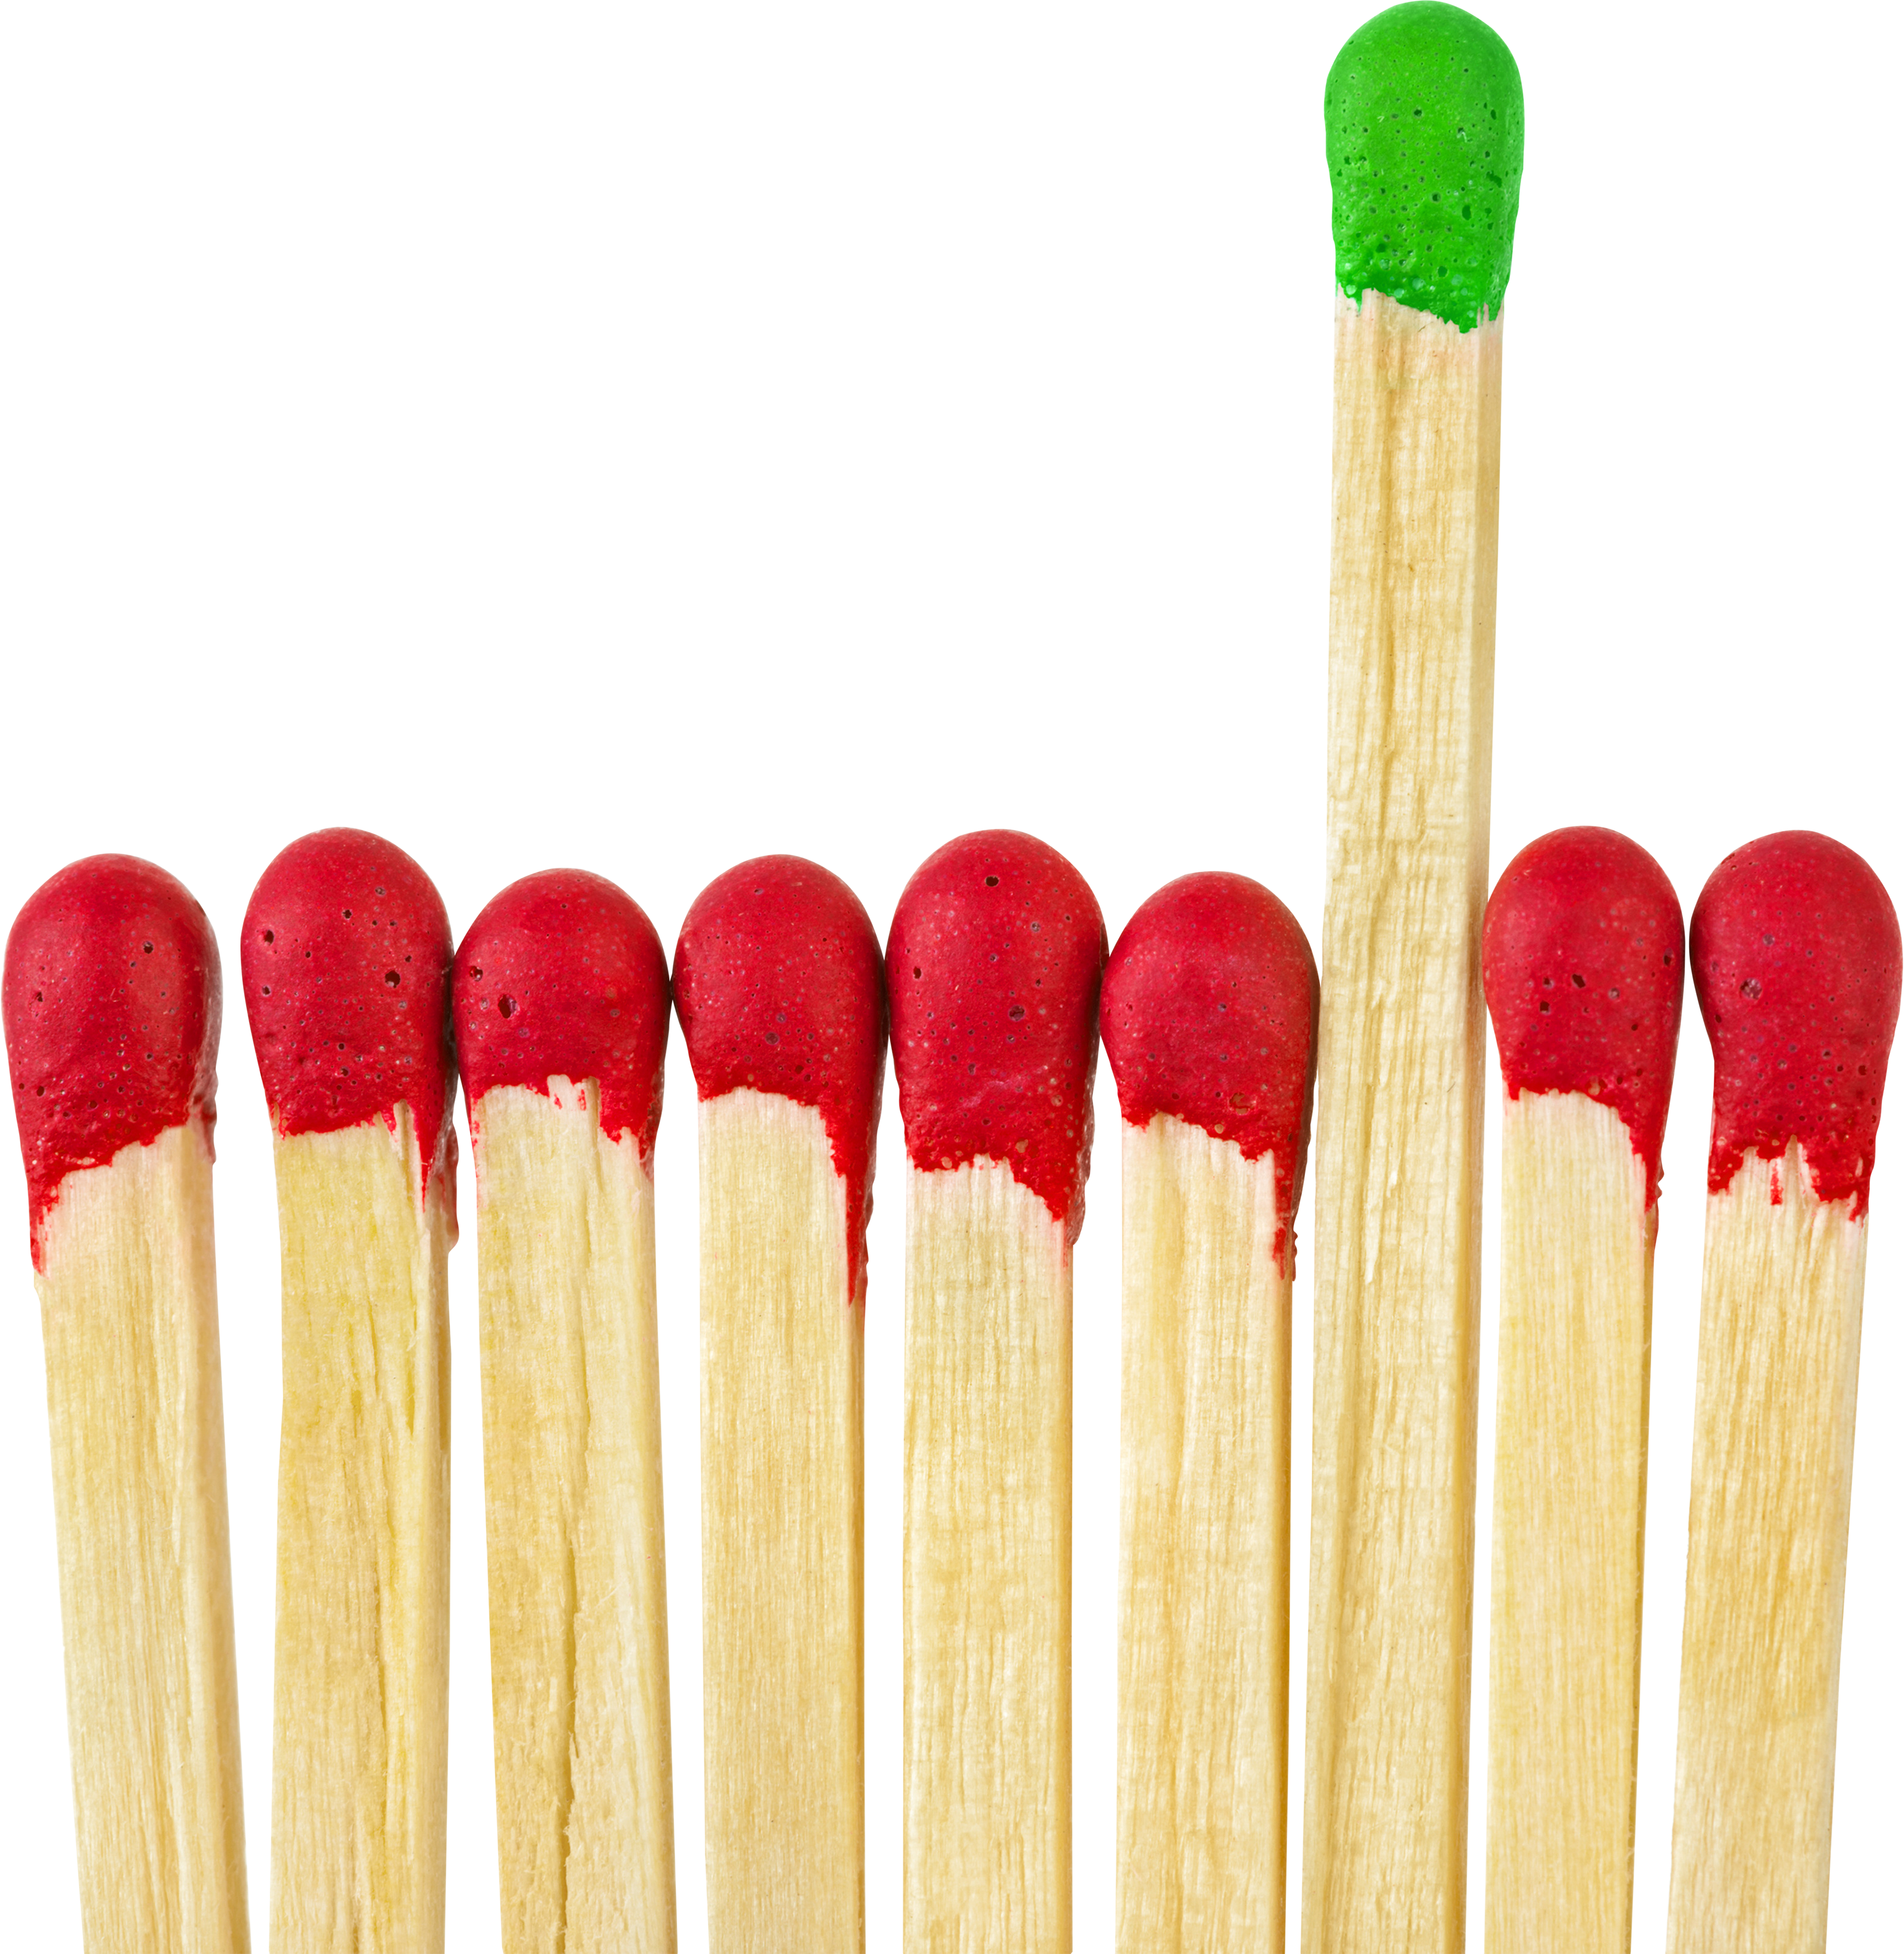 Matches PNG image, free PNG Matches download 